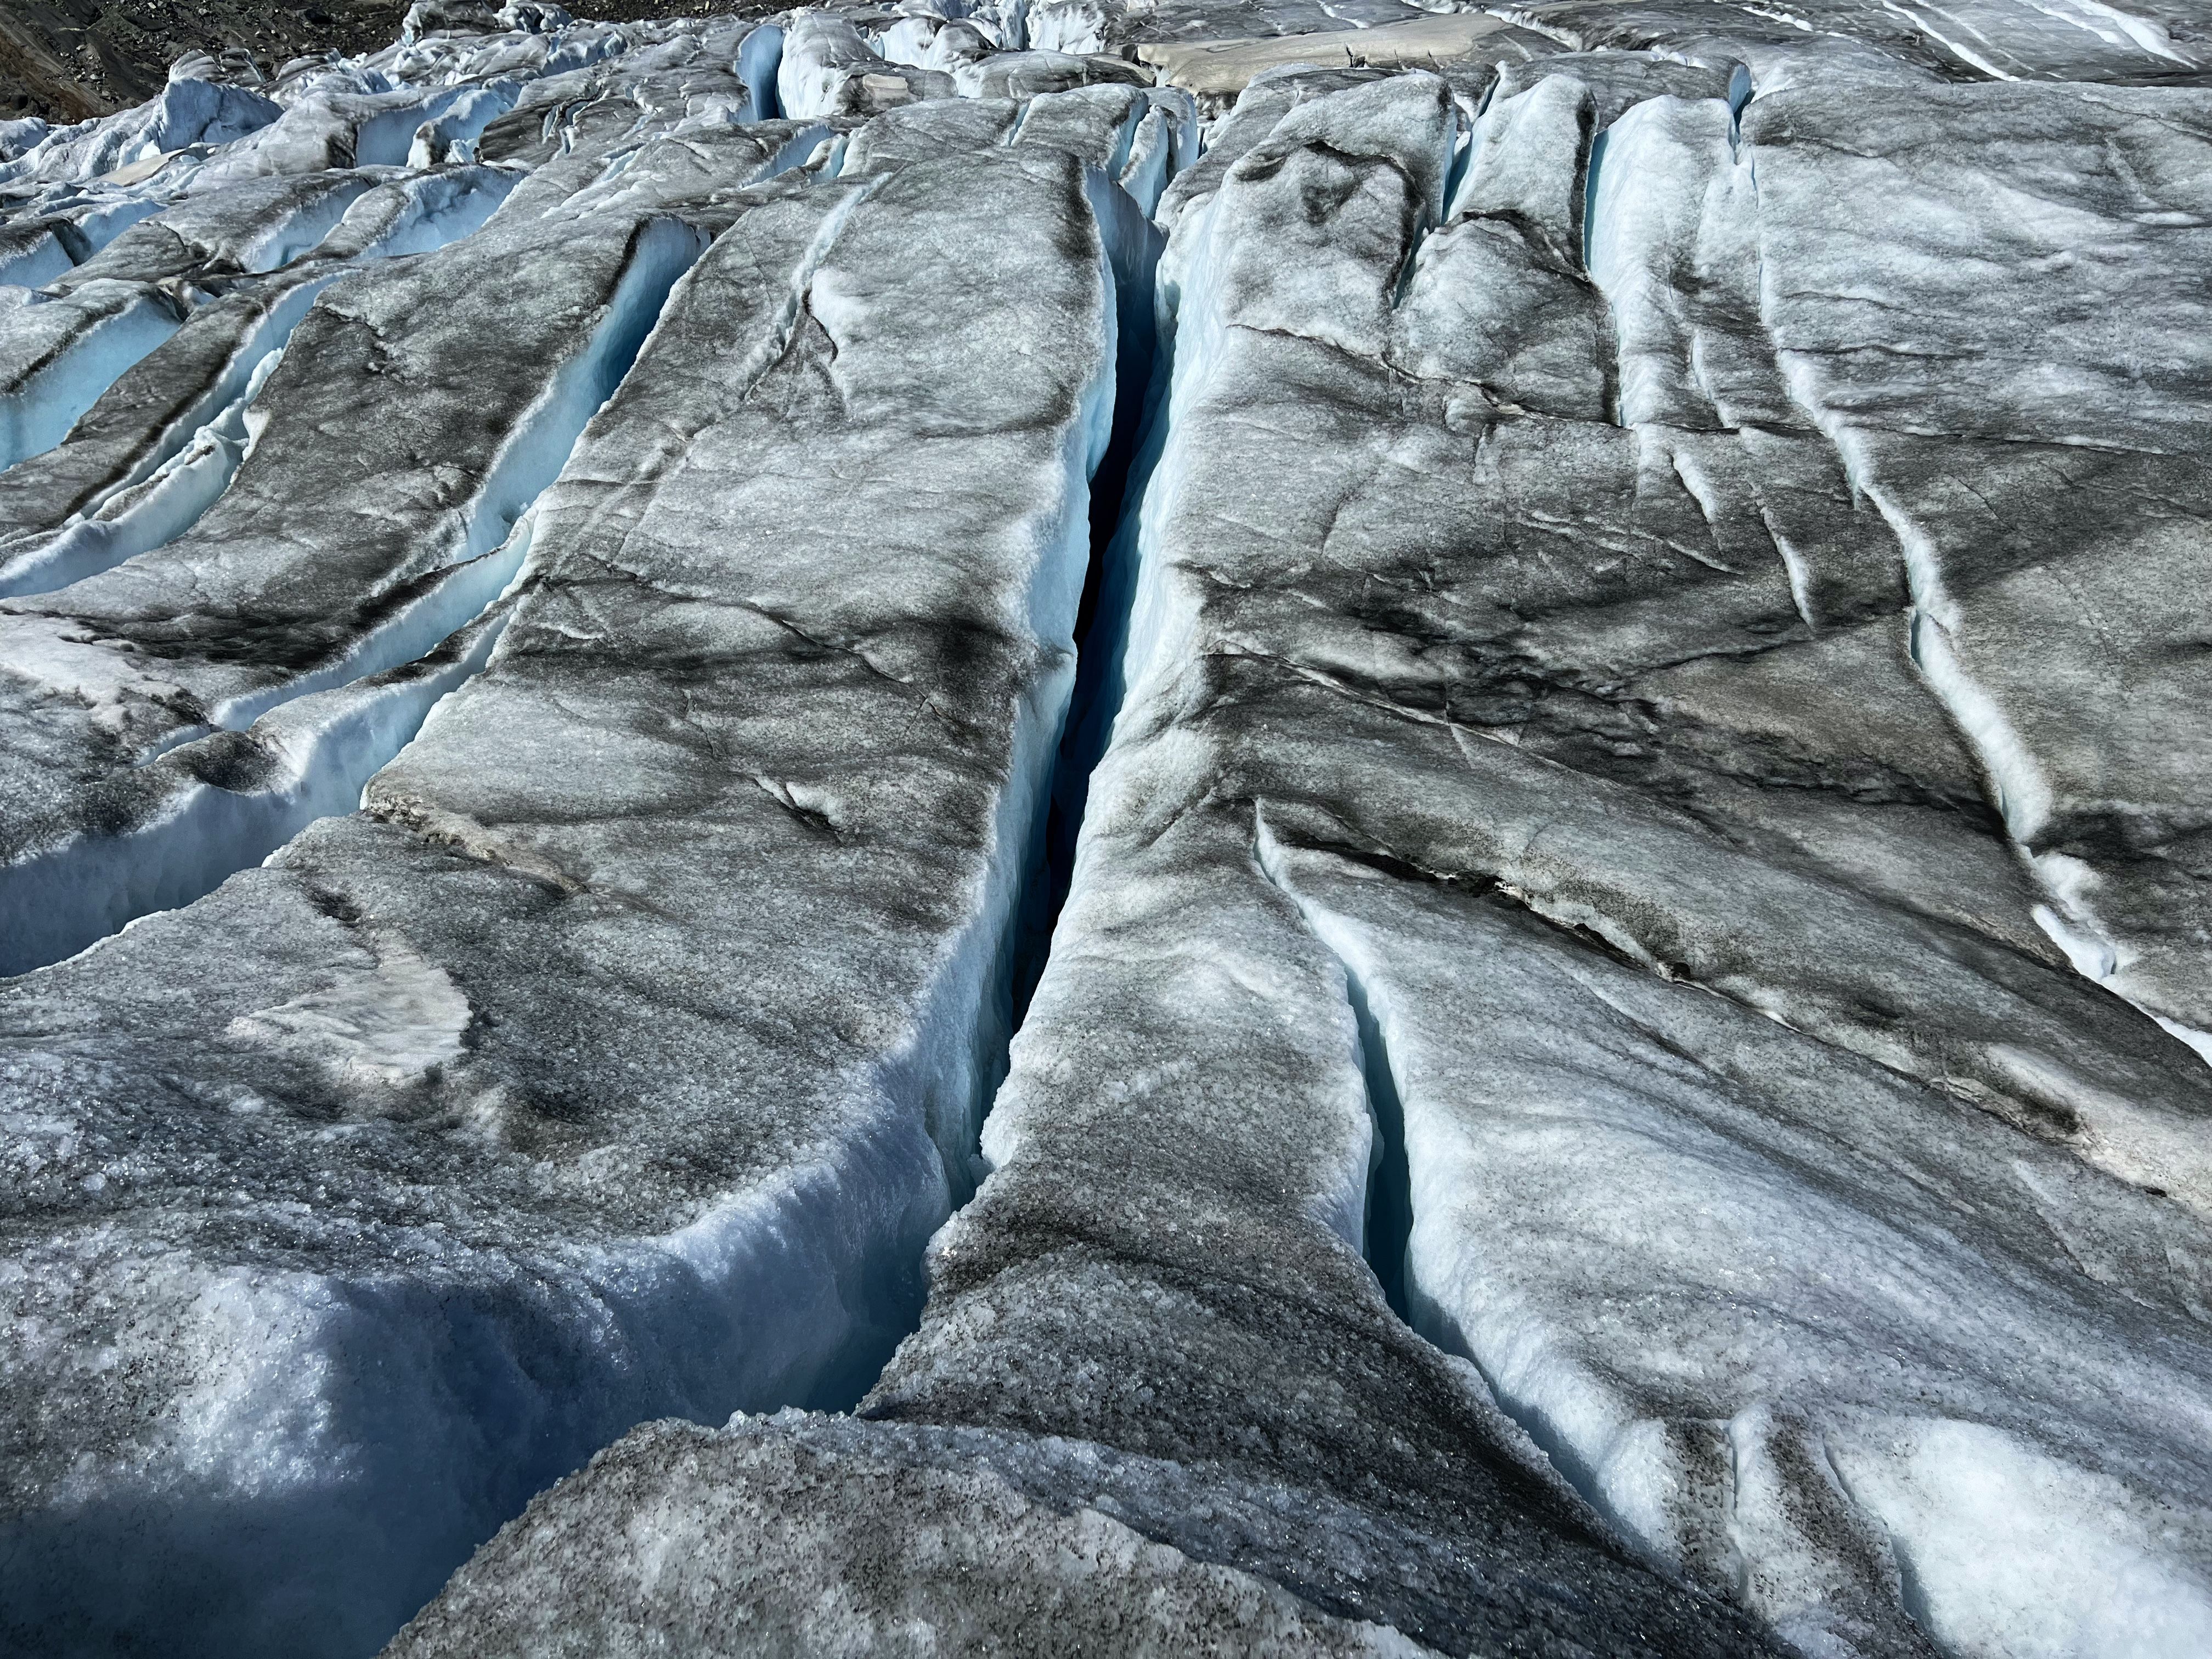 Deep crevasses in an unnamed glacier ​ ​ (Picture courtesy of Thomas Rex Beverly)